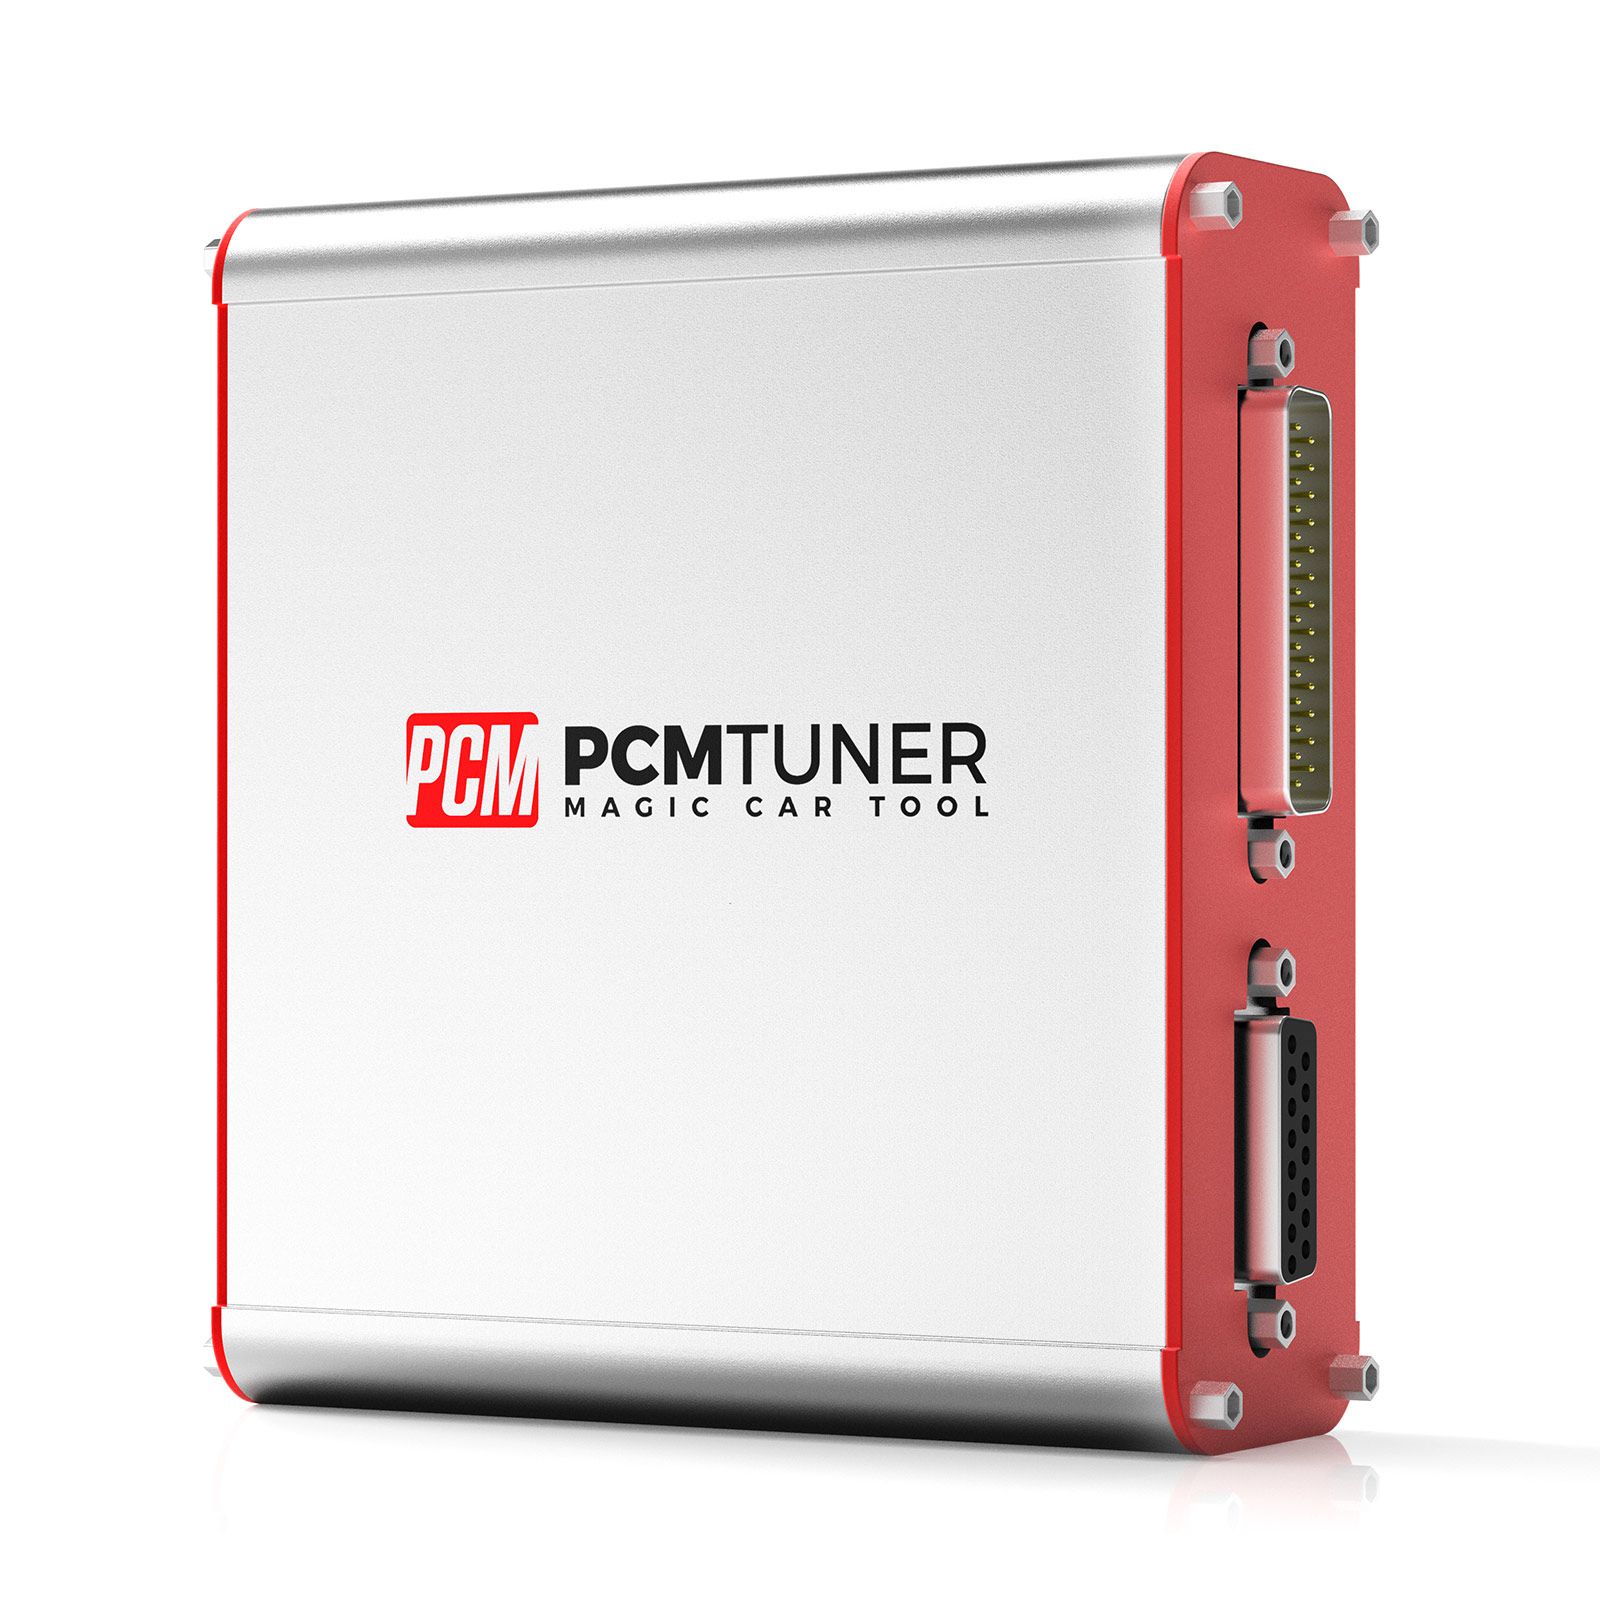 2022 Newest V1.26 PCMtuner ECU Programmer with 67 Modules Online Update Support Checksum and Pinout Diagram with Free Damaos for Users